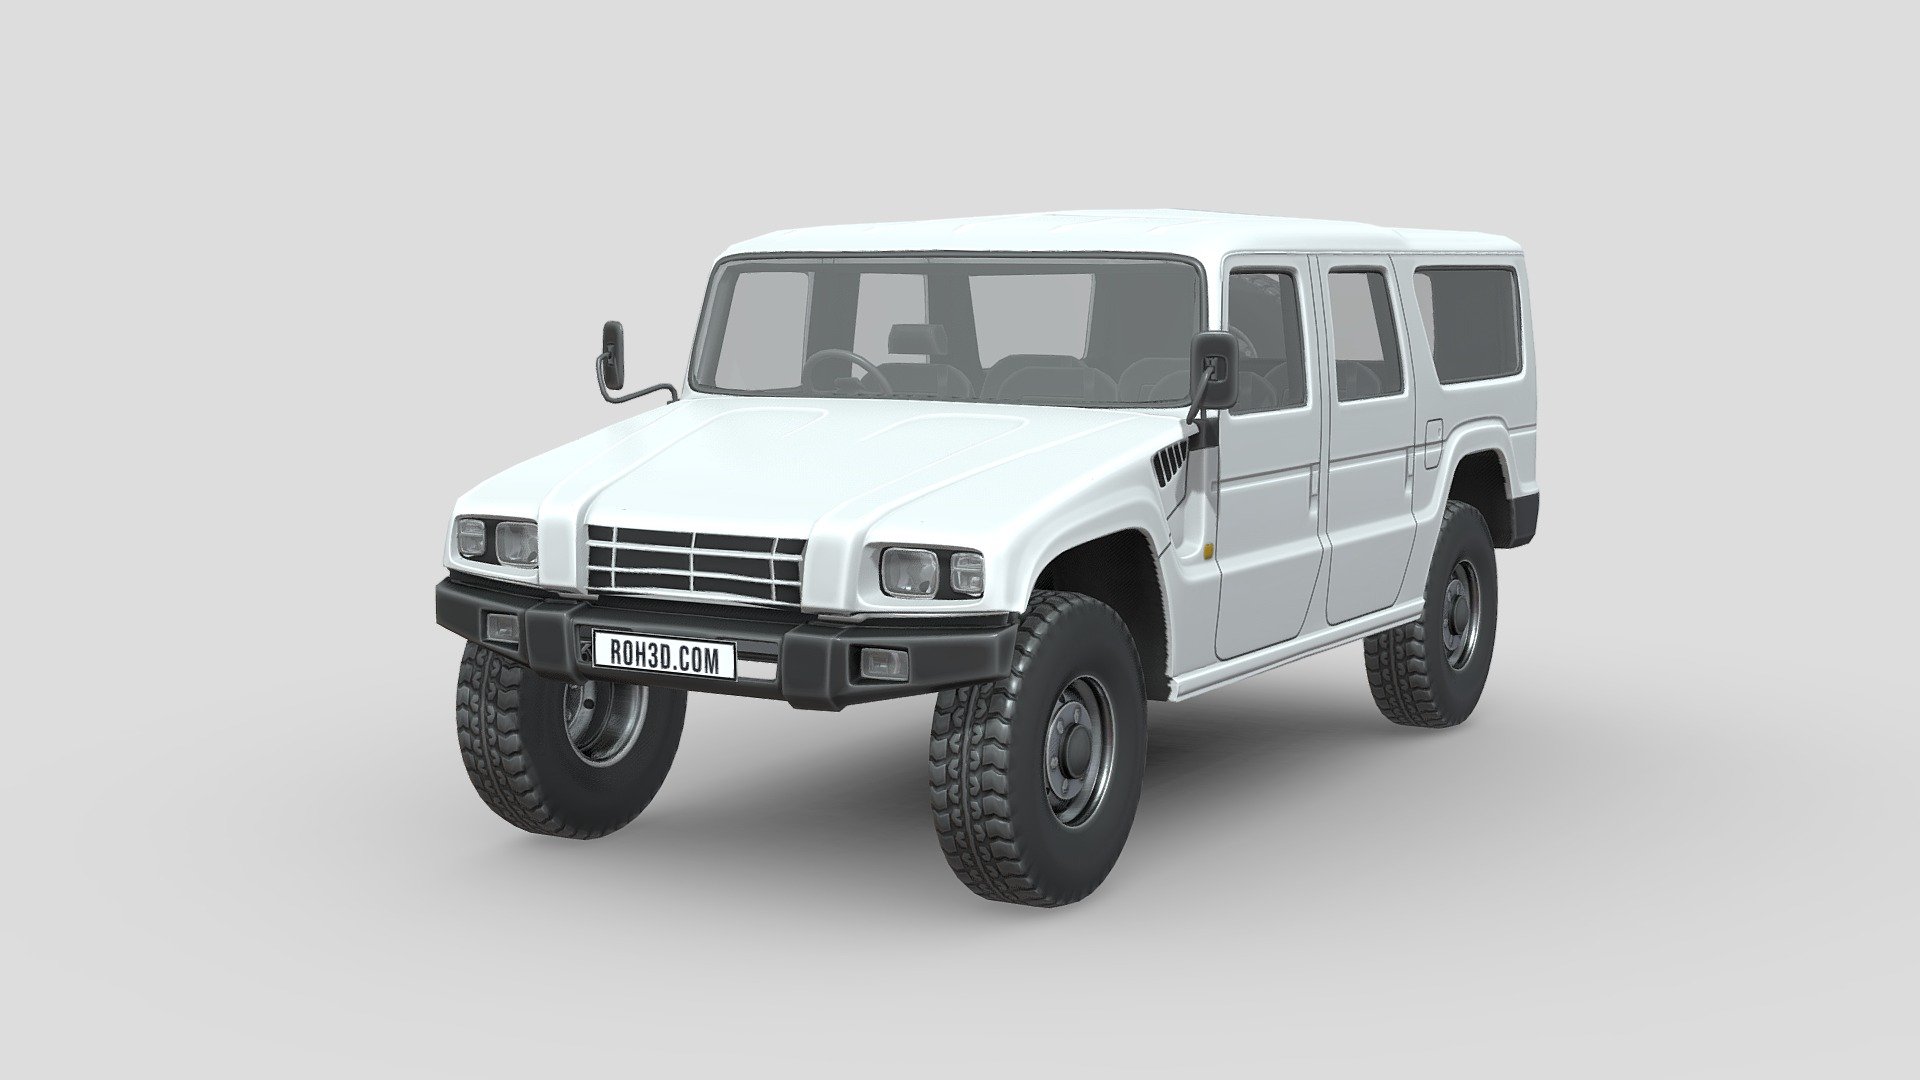 The Toyota Mega Cruiser (Japanese: トヨタ・メガクルーザー, Toyota Megakurūzā) is a large, heavy-duty four wheel drive SUV introduced by Toyota in 1995. The largest 4WD ever built by Toyota, it resembles the Hummer H1 in terms of design.

Like the Hummer, the Mega Cruiser was originally designed primarily for military use with the vehicle seeing duty as a transport vehicle in the Japan Self Defense Forces.

Sold exclusively in Japan via Toyota Store locations, the Mega Cruiser was also used by prefectural police, the Japan Auto Federation and fire/rescue departments. As of 2020, it was reported that Toyota had produced 3,000 units before production was halted. A total of 133 Mega Cruisers were sold to civilians.

A prototype of the Toyota Mega Cruiser was first presented to the public at the 30th Tokyo Motor Show in October 1993. Production began in late 1995 at Toyota's Gifu Auto Body subsidiary before sales began in 1996 3d model